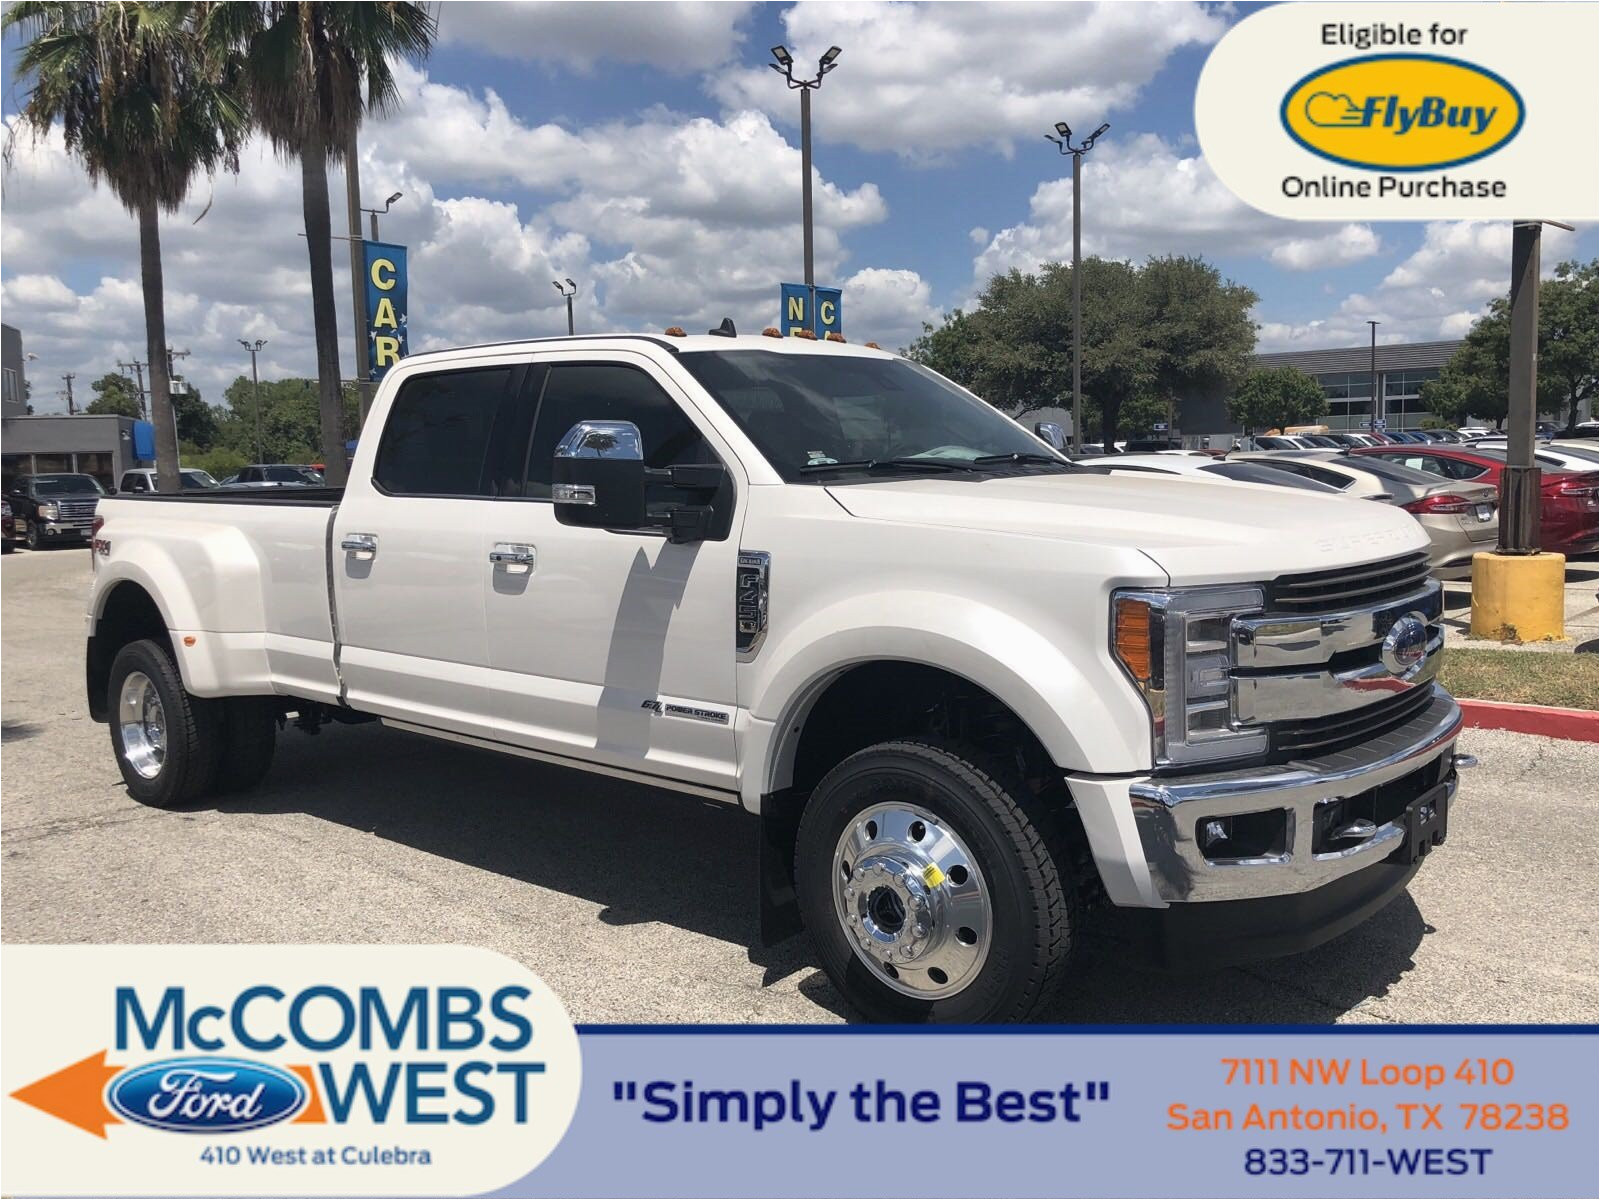 King Ranch Texas Map New 2019 ford Super Duty F 450 Drw King Ranch Crew Cab Pickup In San